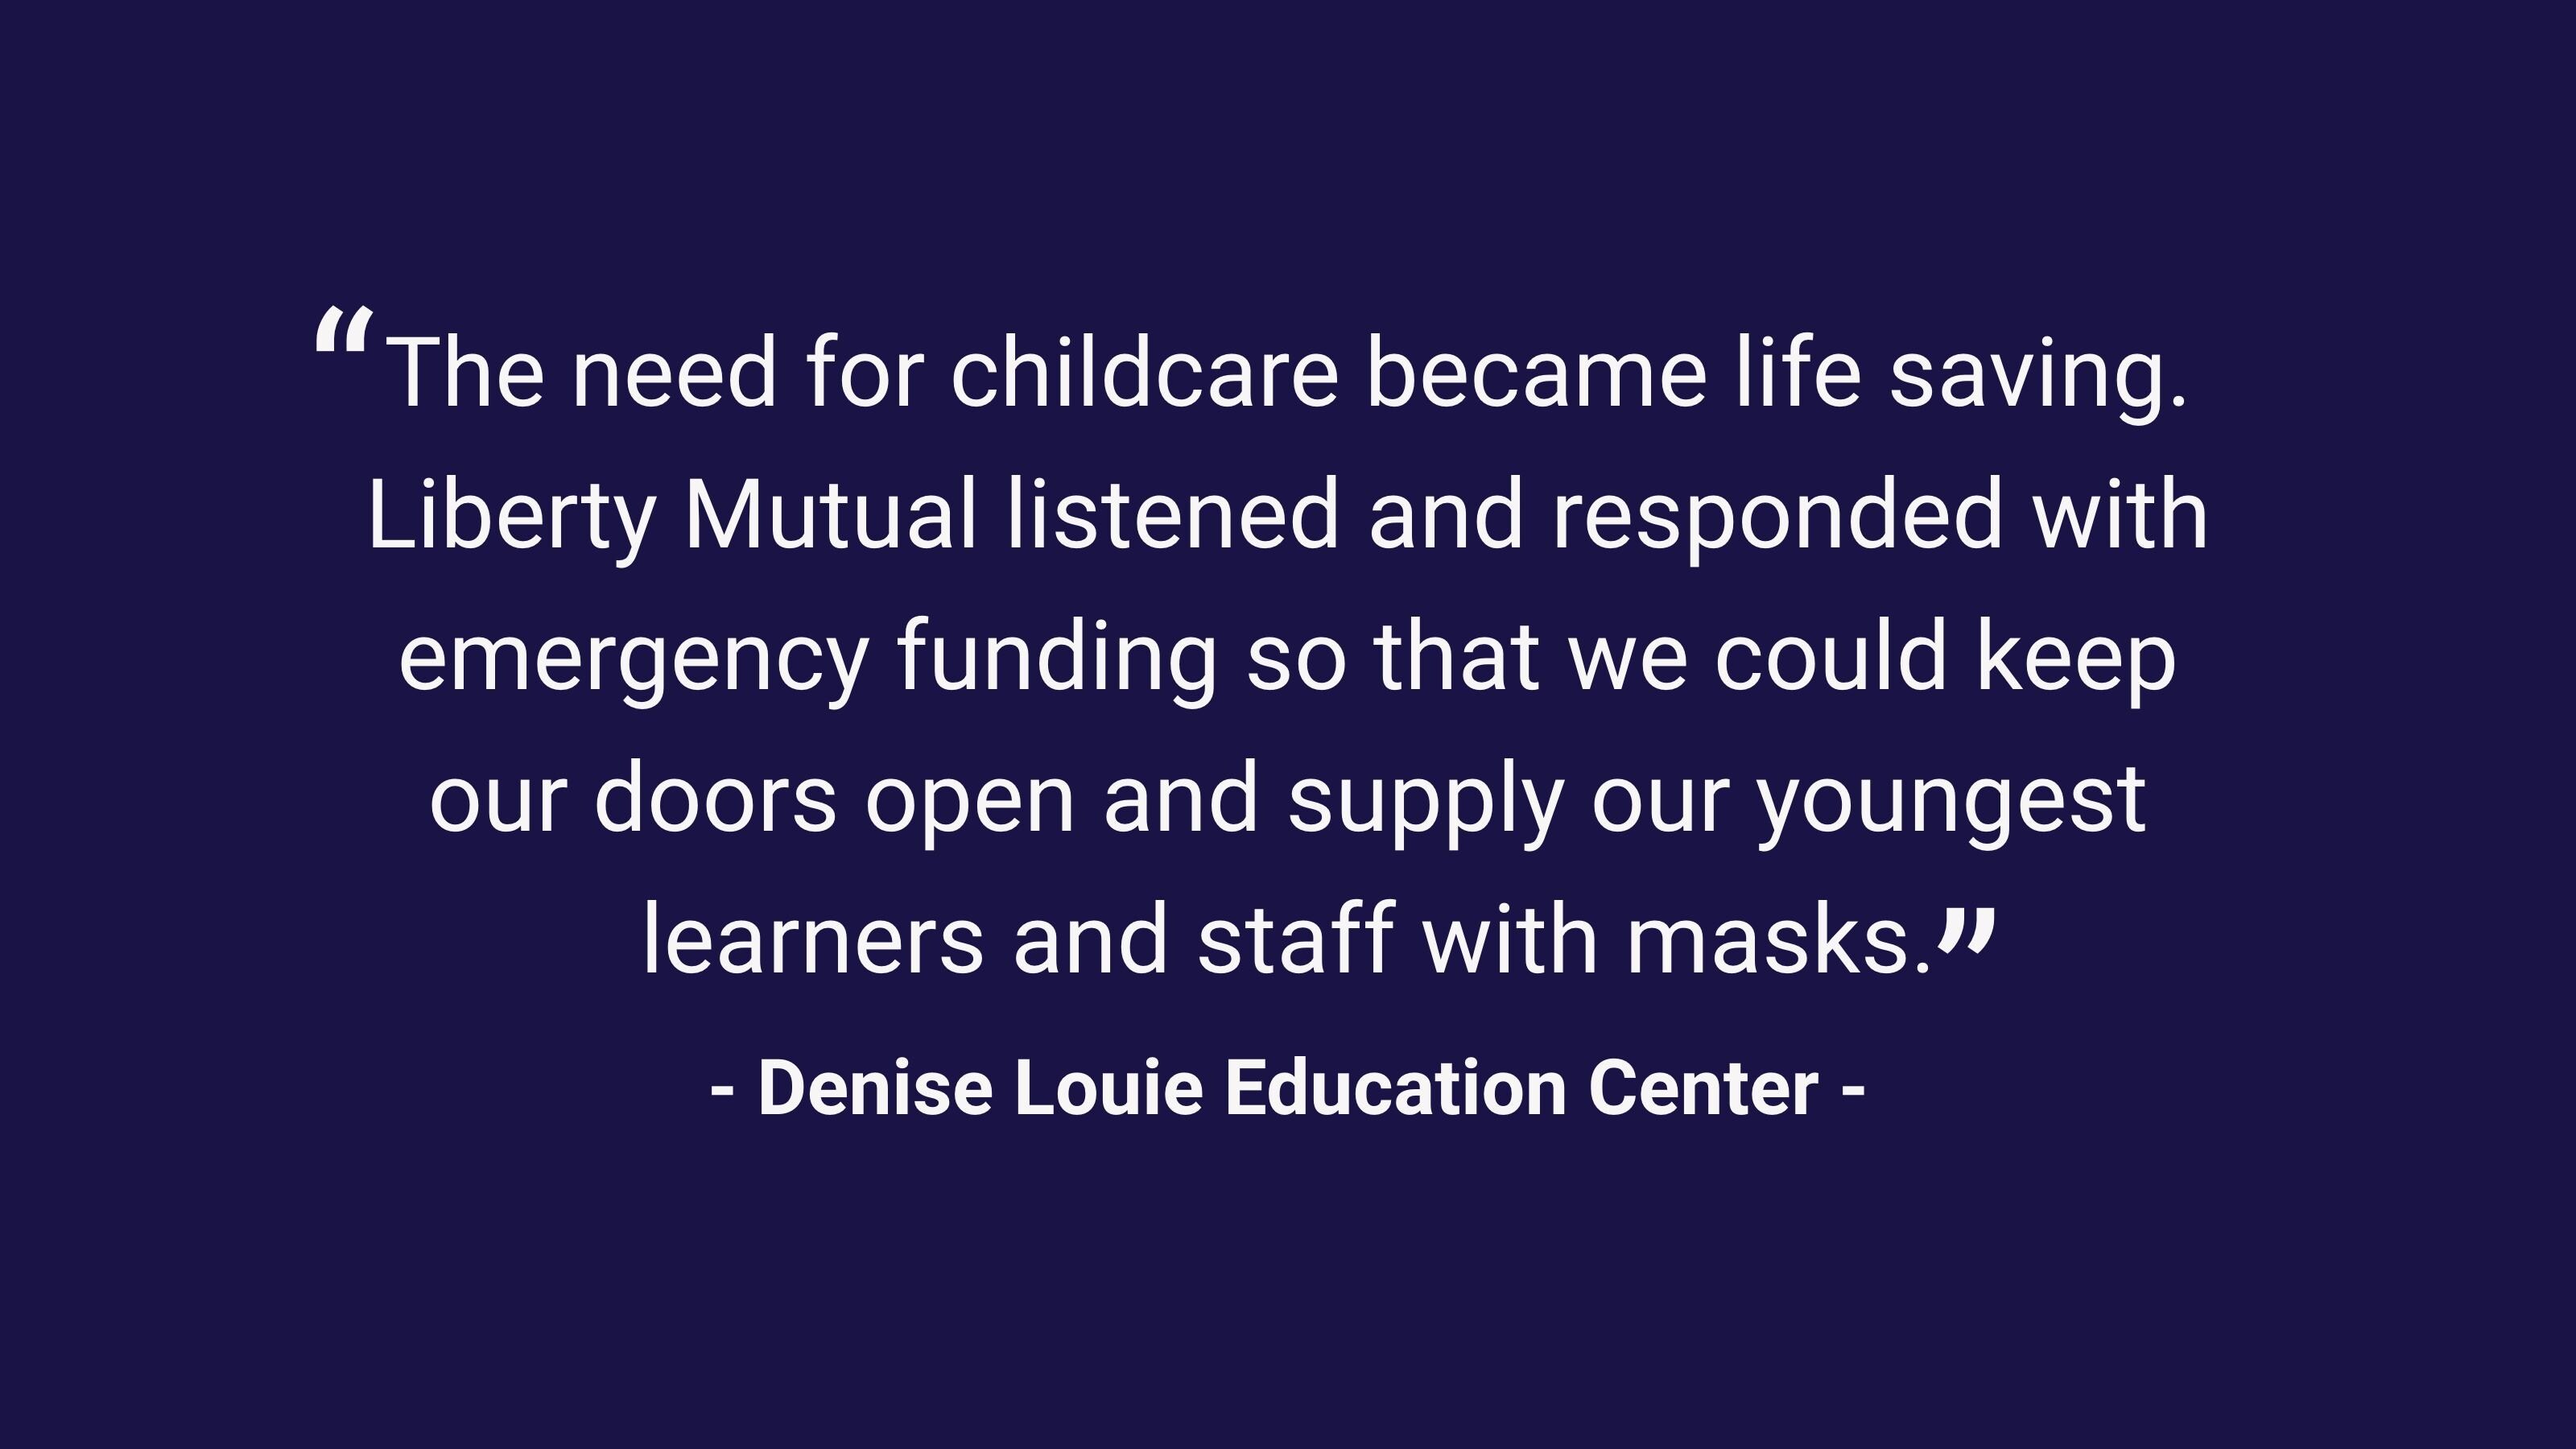 (slide 3 of 3) "The need for childcare became life saving. Liberty Mutual listened and responded with emergency funding so that we could keep our doors open and supply our youngest leaners and staff with masks." - Denise Louie Education Center. 